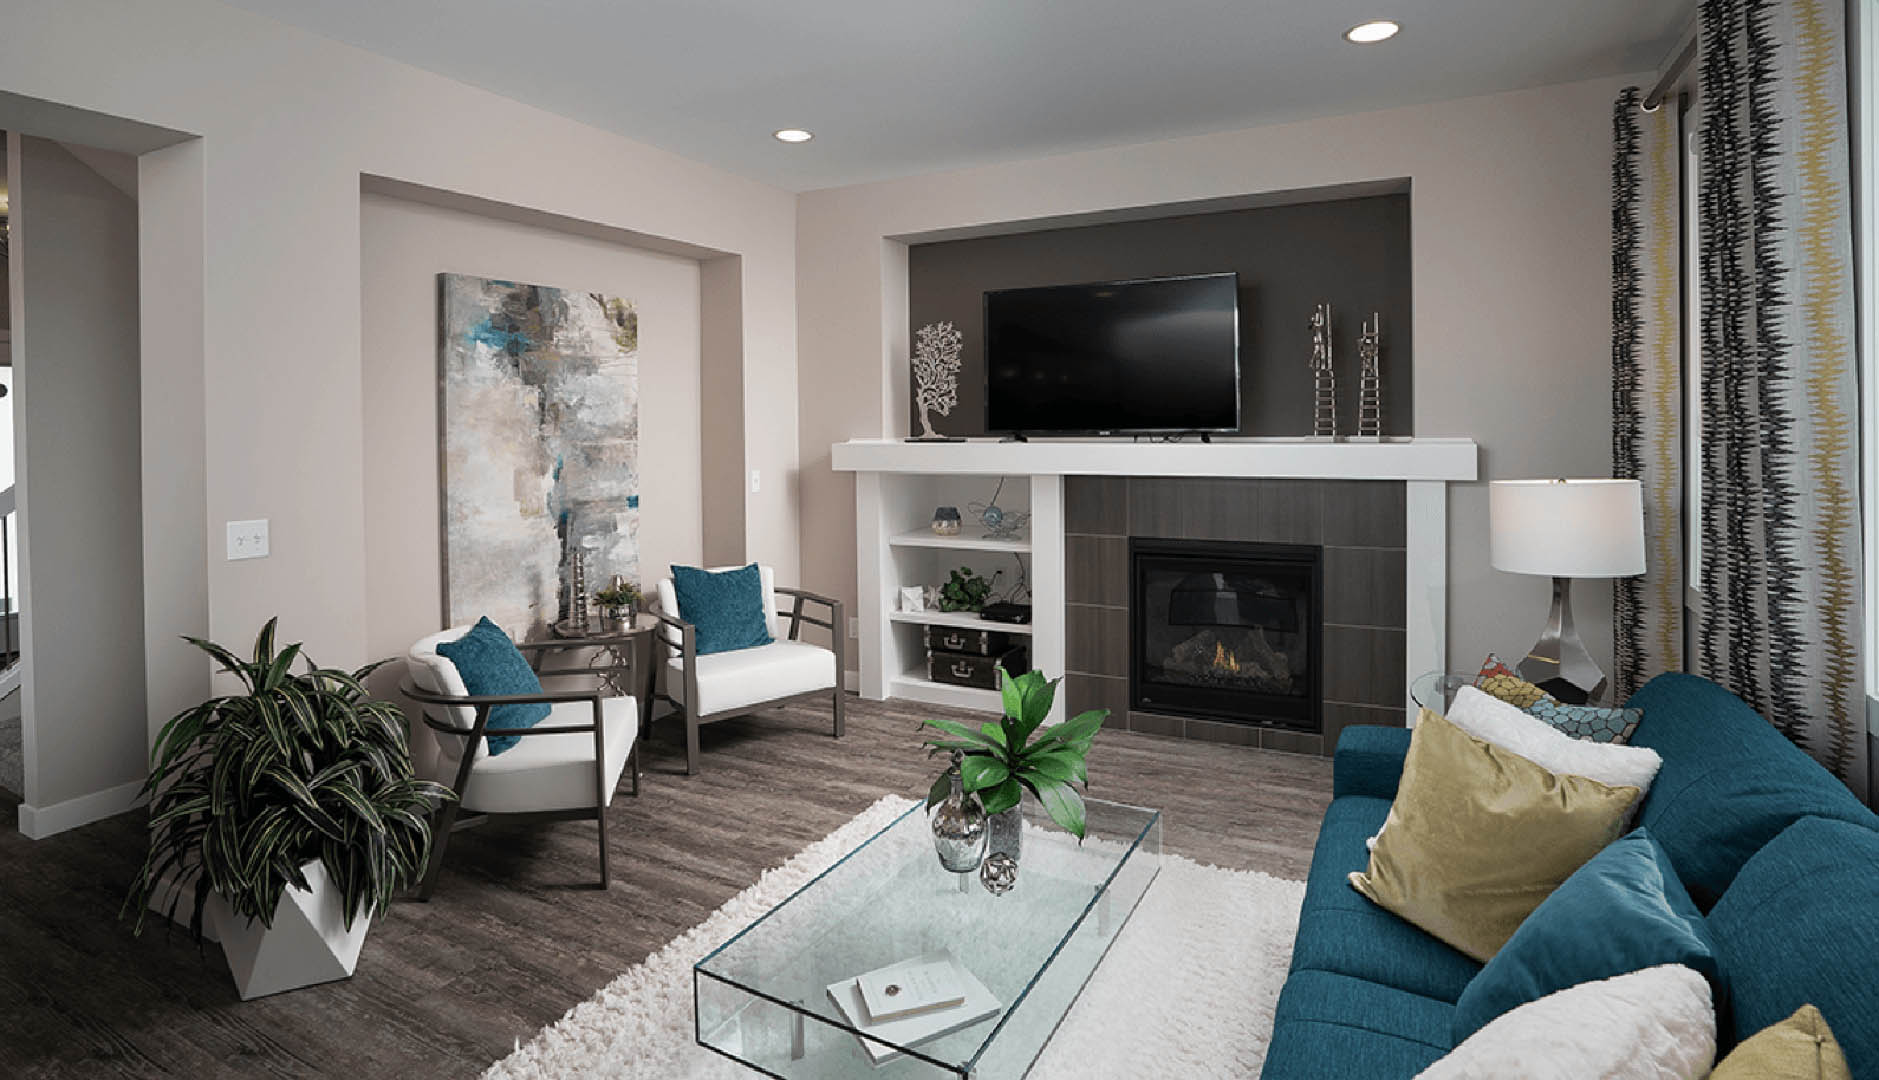 Sneak Peak at a New Broadview Showhome Great Room Image